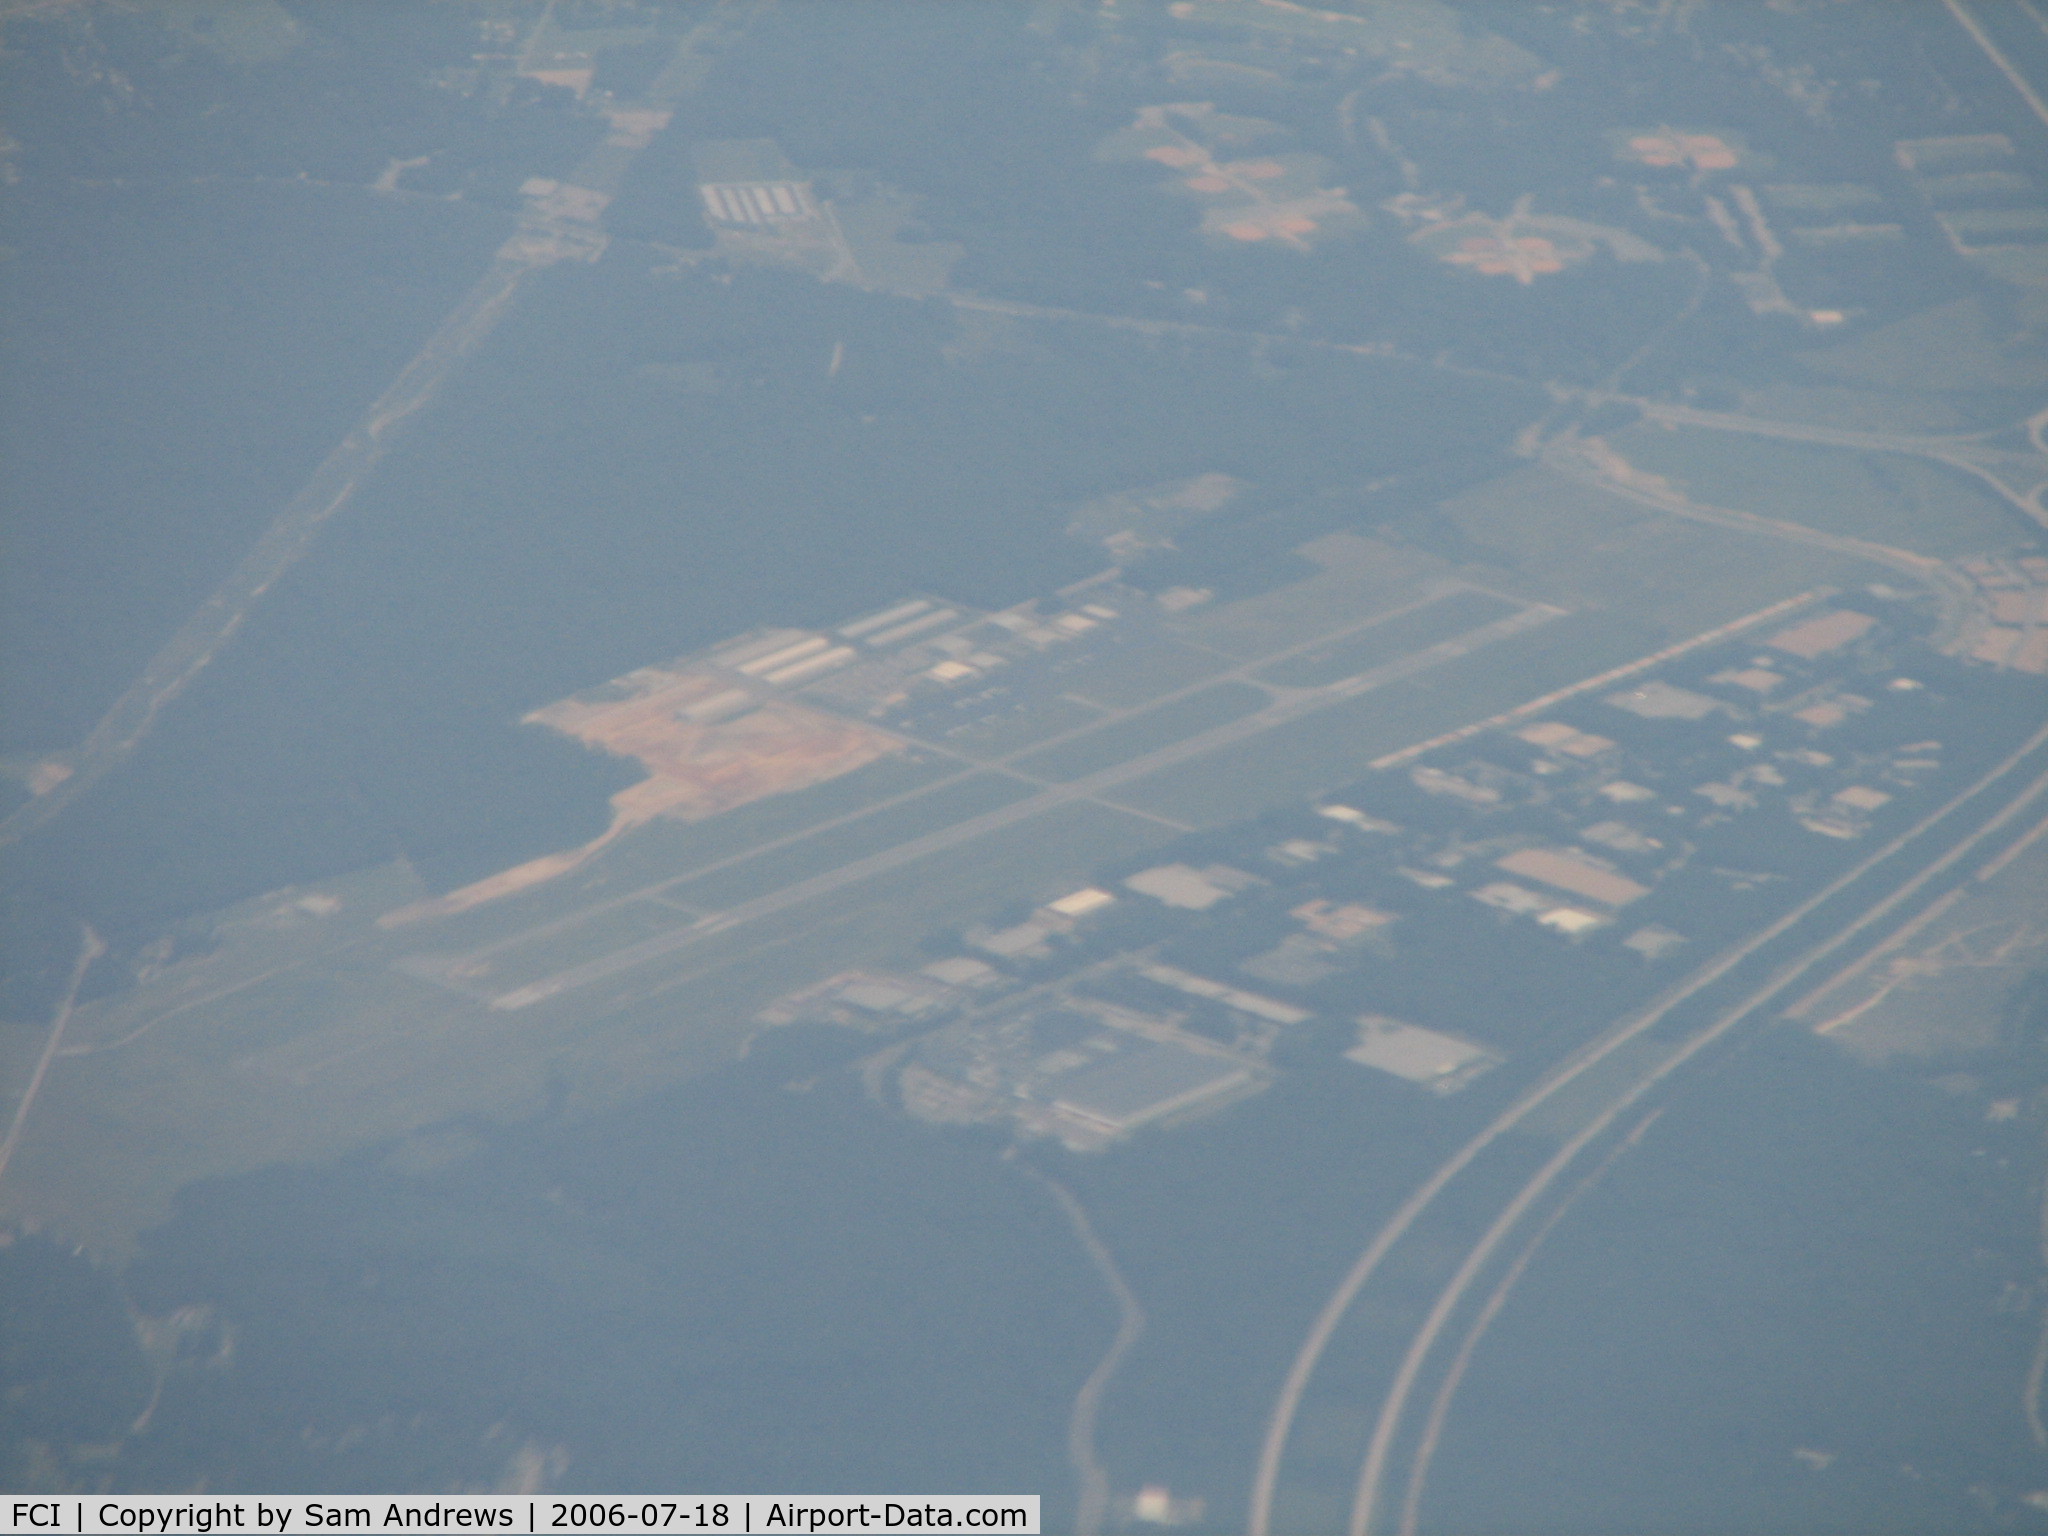 Richmond Executive-chesterfield County Airport (FCI) - on descent into BWI